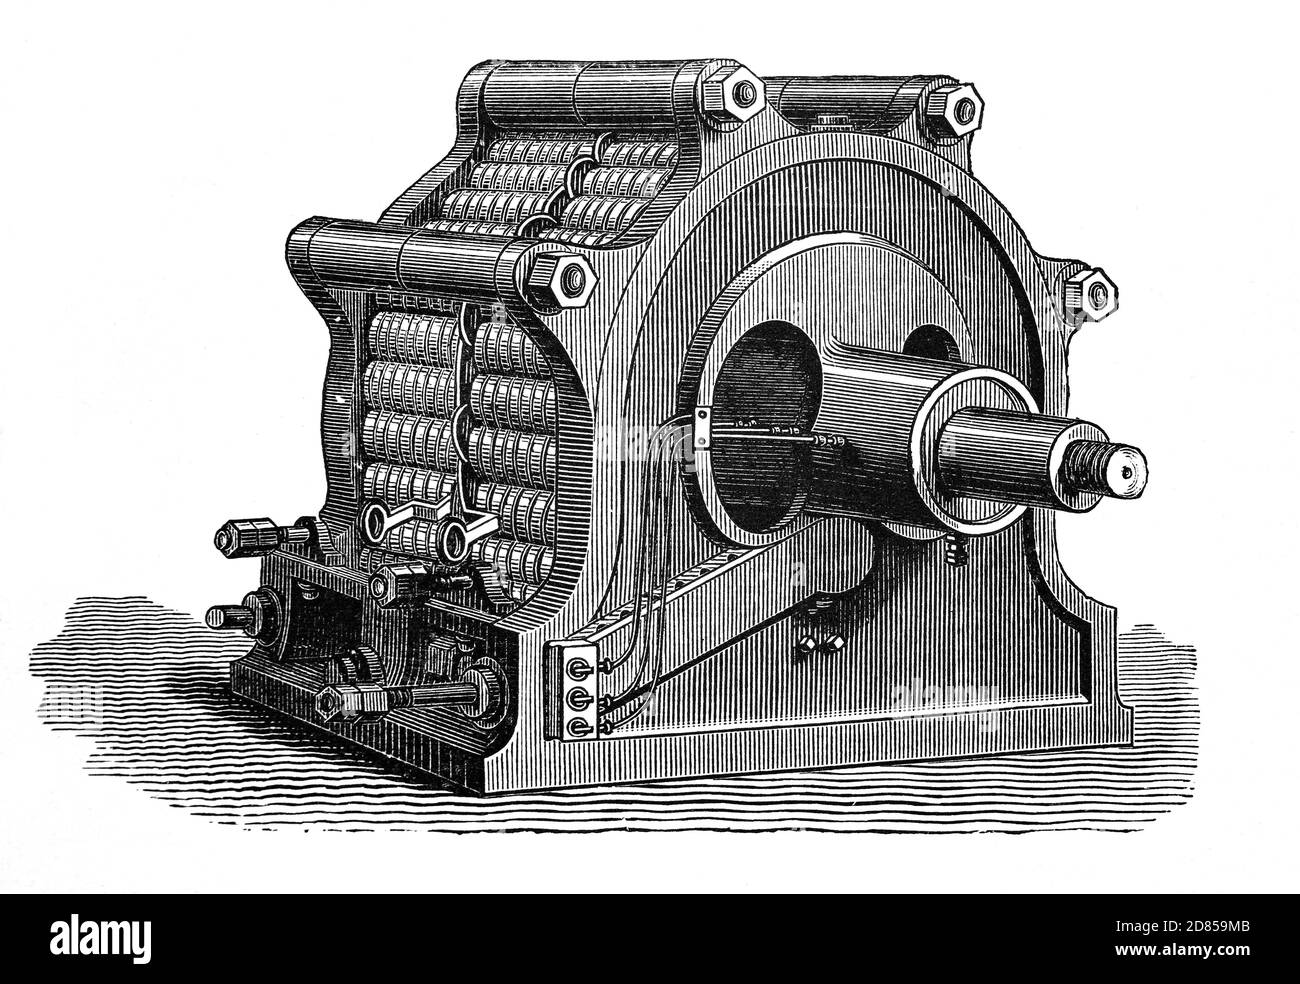 A 19th Century illustration of the Ferranti-Thompson dynamo, a generator makes AC electricity (AC Alternating Current) using electromagnetism. When the  Zigzag armature invented by Liverpoool born Sebastian de Ferranti (1864-1930) was combined with Sir William Thomson's (Lord Kelvin's) dynamo the machine gave five times the output of any previous machine of it's size. Stock Photo